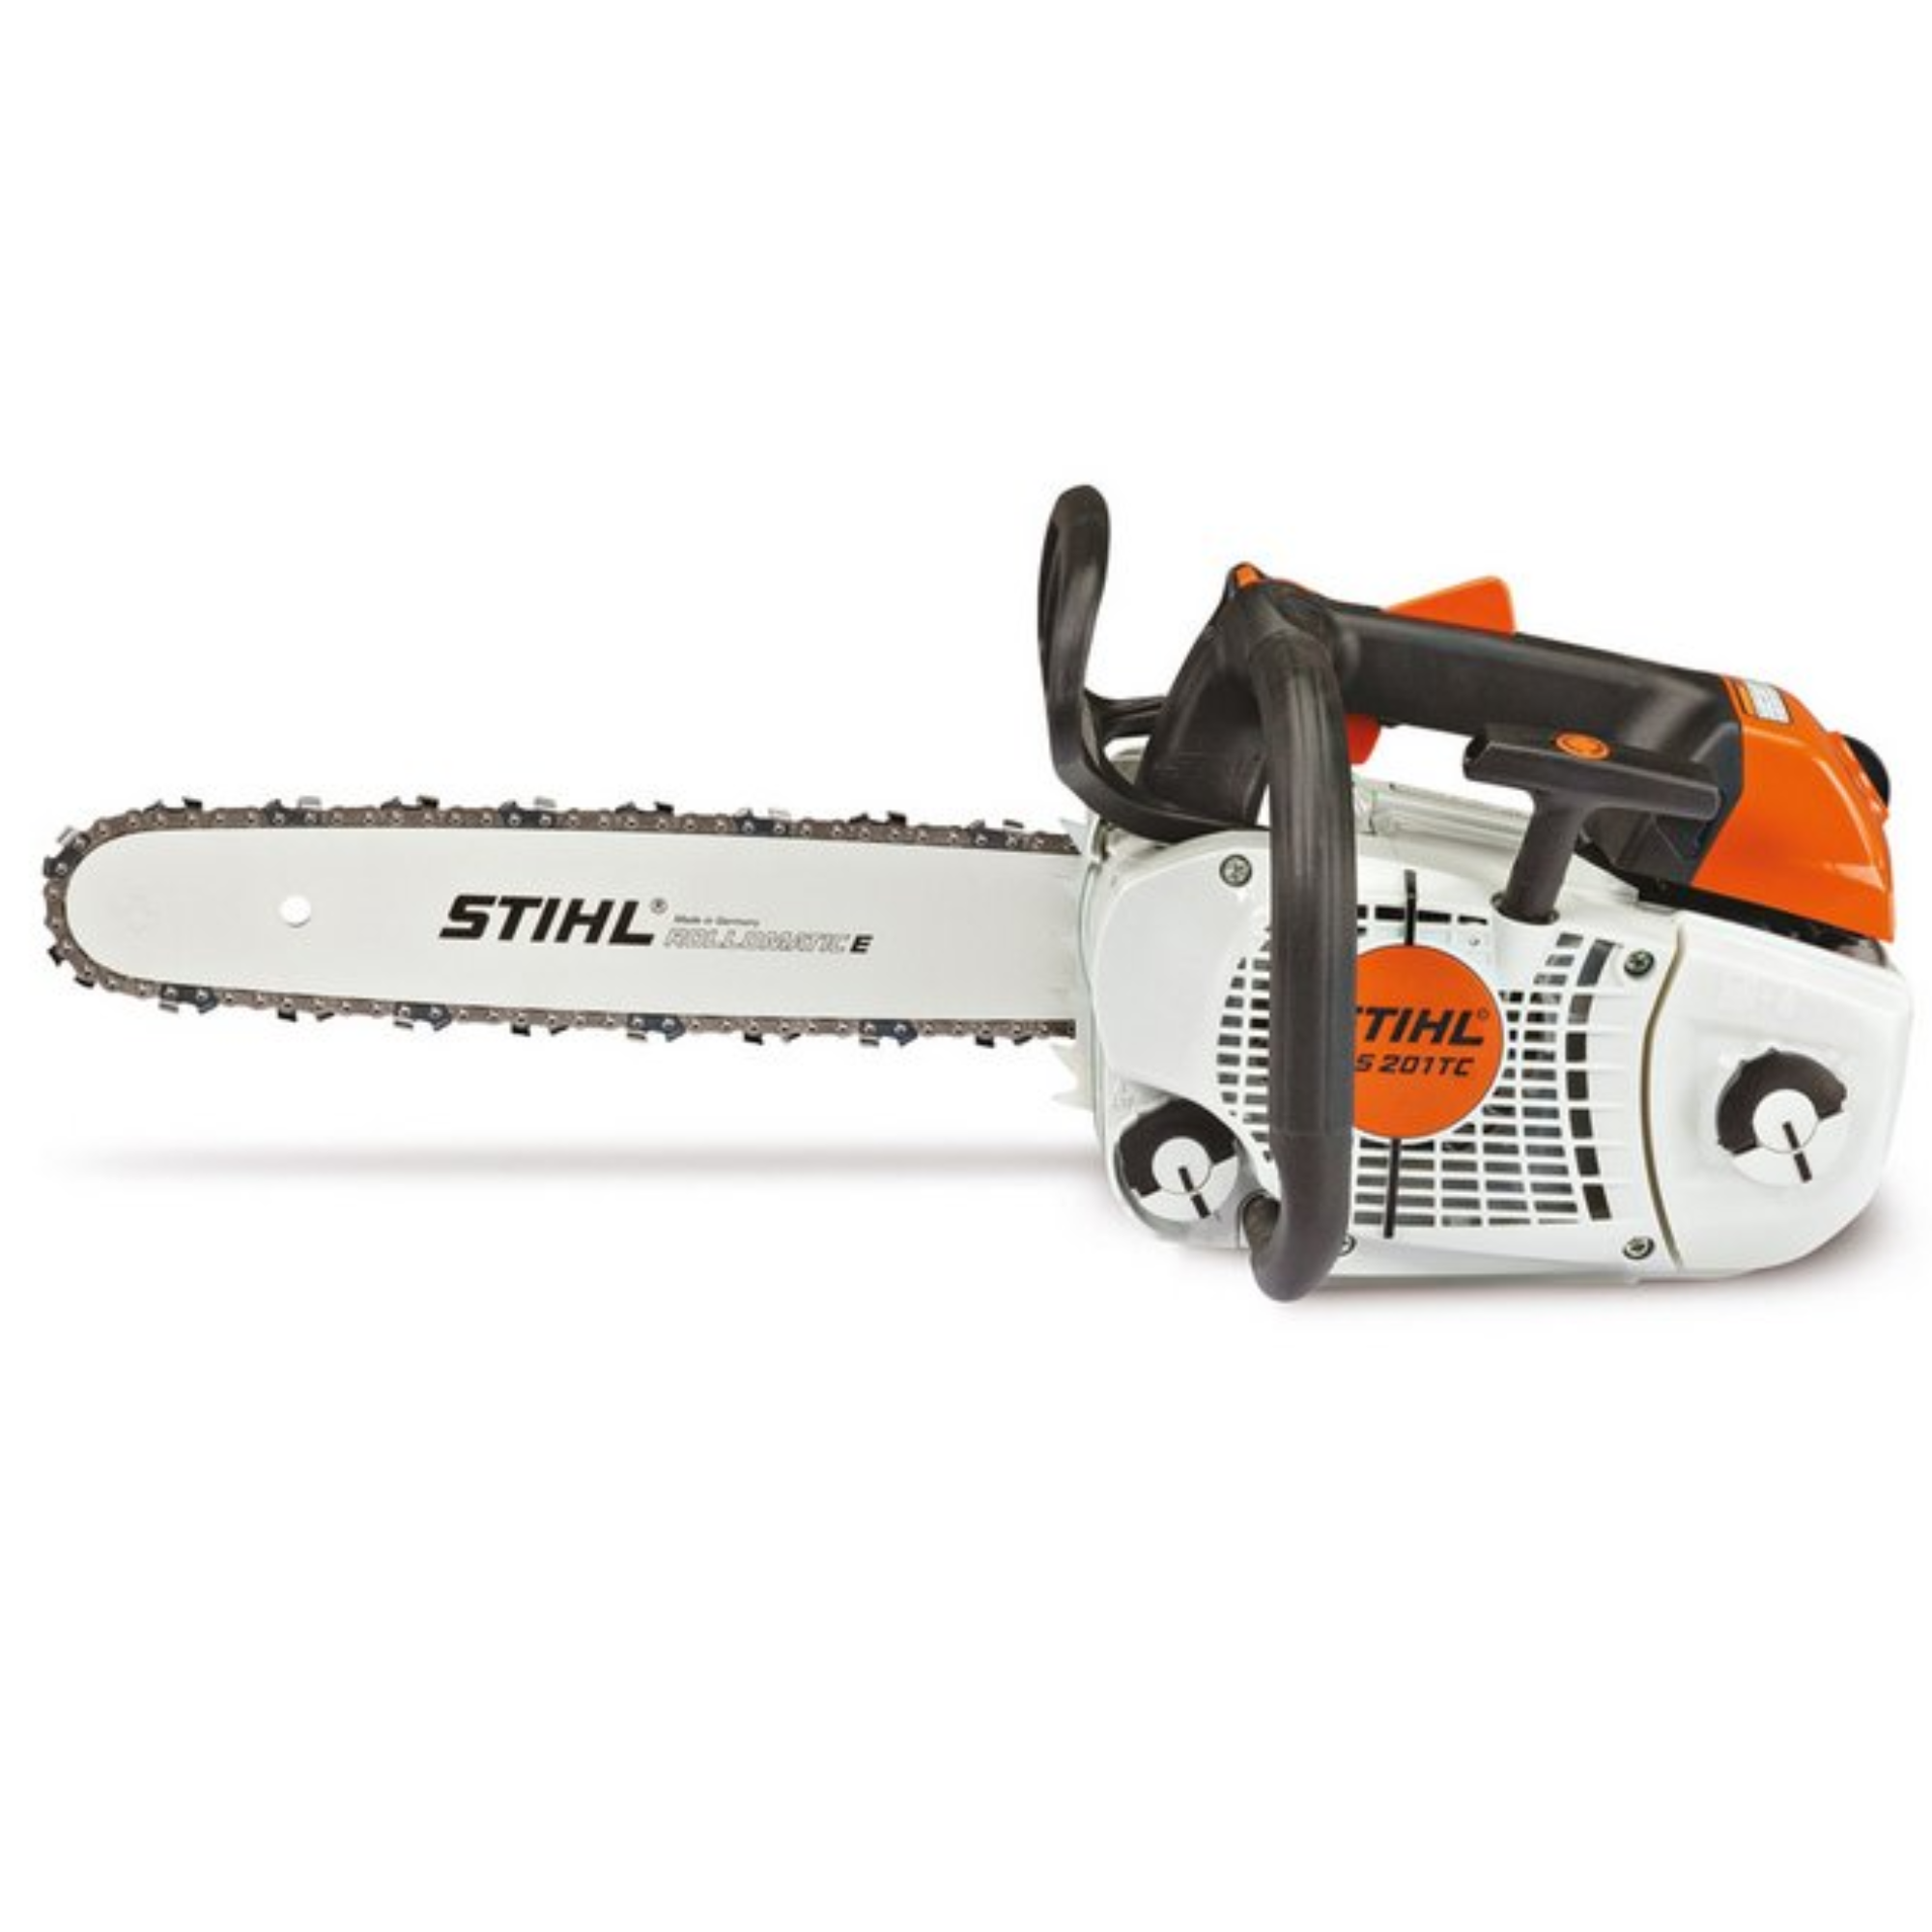 Stihl MS 201 T C-M Gas Powered 14 Inch In-Tree Chainsaw with M-Tronic